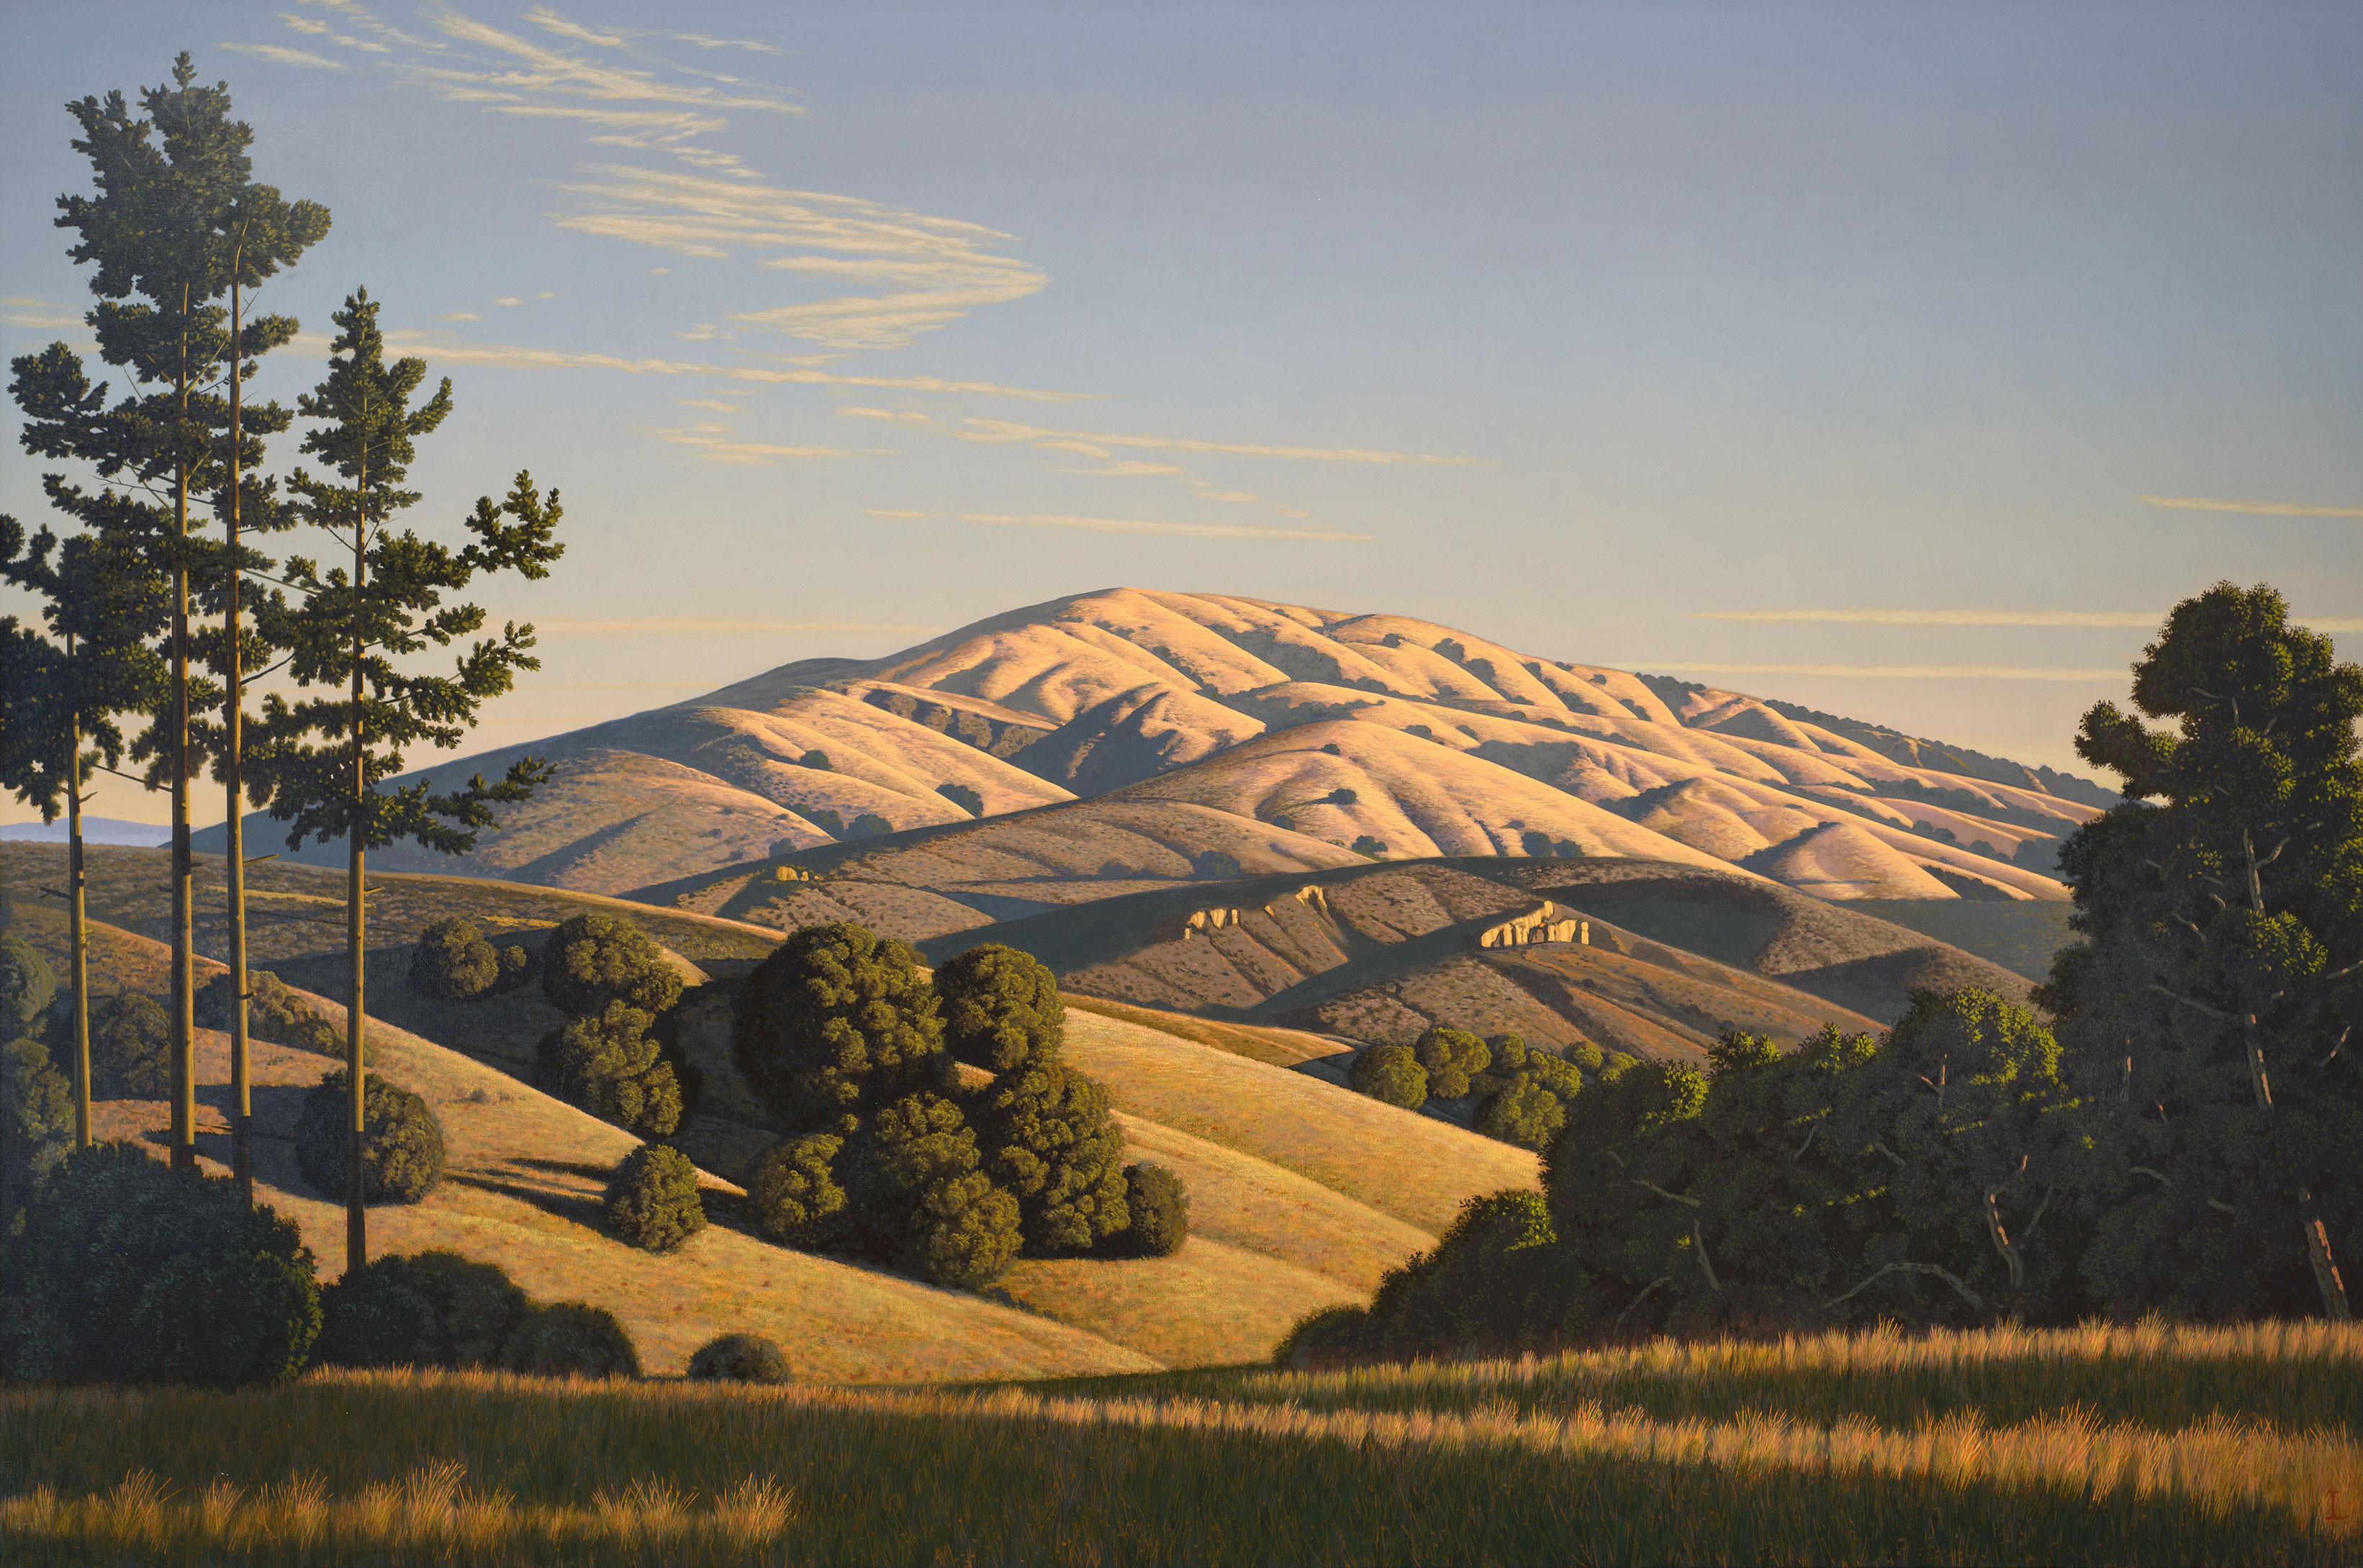 David Ligare, Mountain, 2013, oil on canvas, 60 x 90 in.